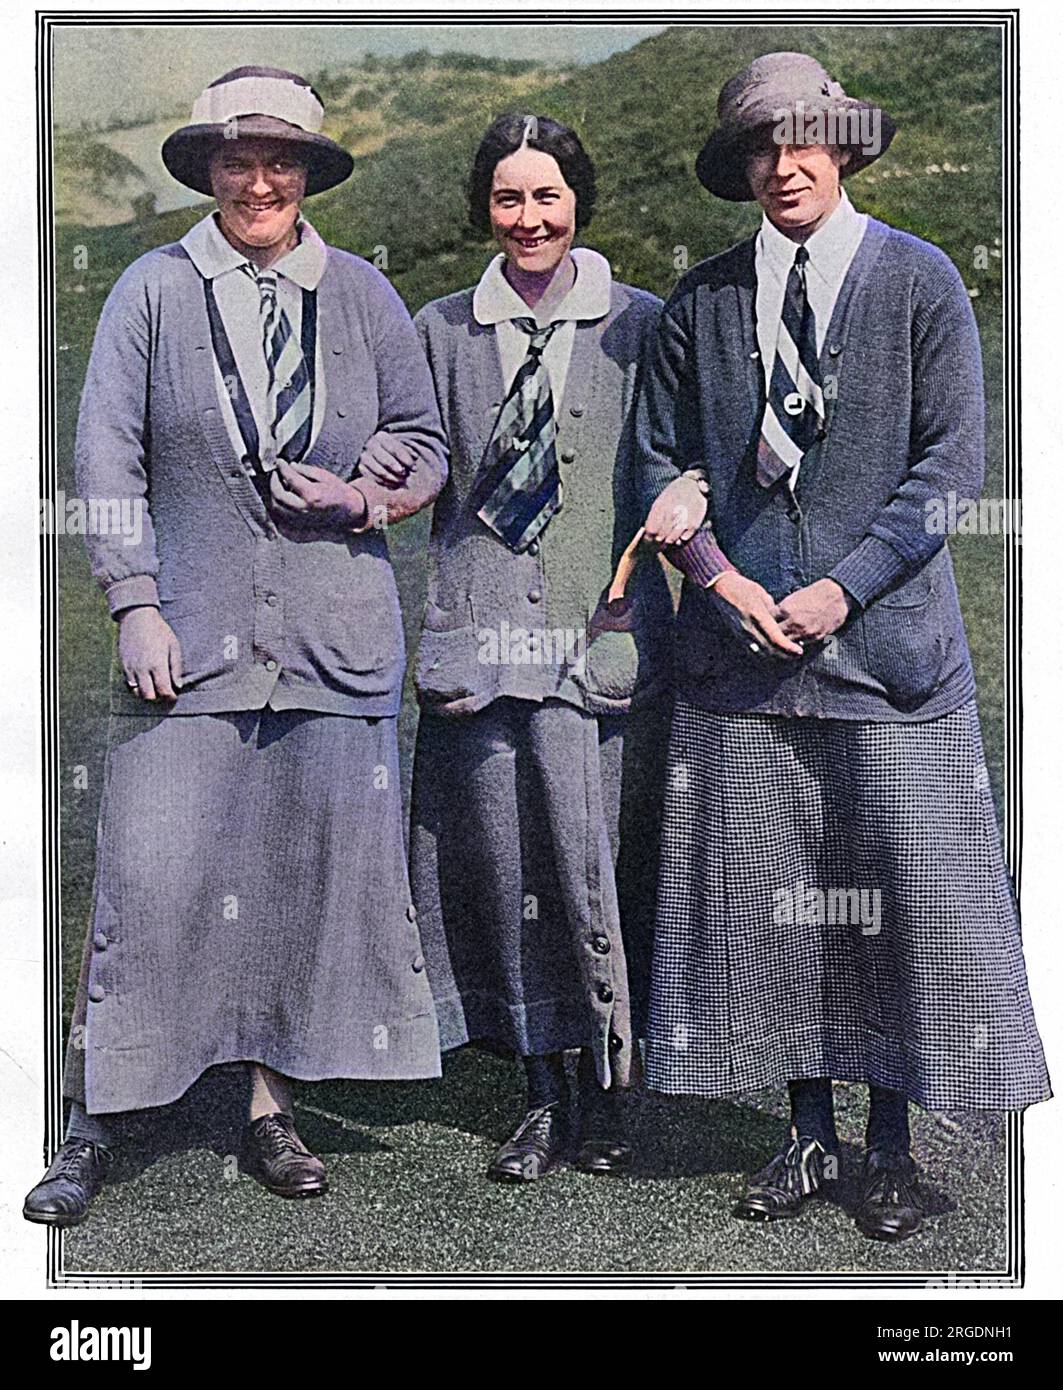 Famous female golfers who fought a strenuous battle for the Cheshire Ladies' Championship at Wallasey in April 1914.  From left to right, Miss Gladys Ravenscroft (American champion), Miss Muriel Dodd (Champion of England and Canada) and Miss Doris Chambers (Champion of India). Stock Photo